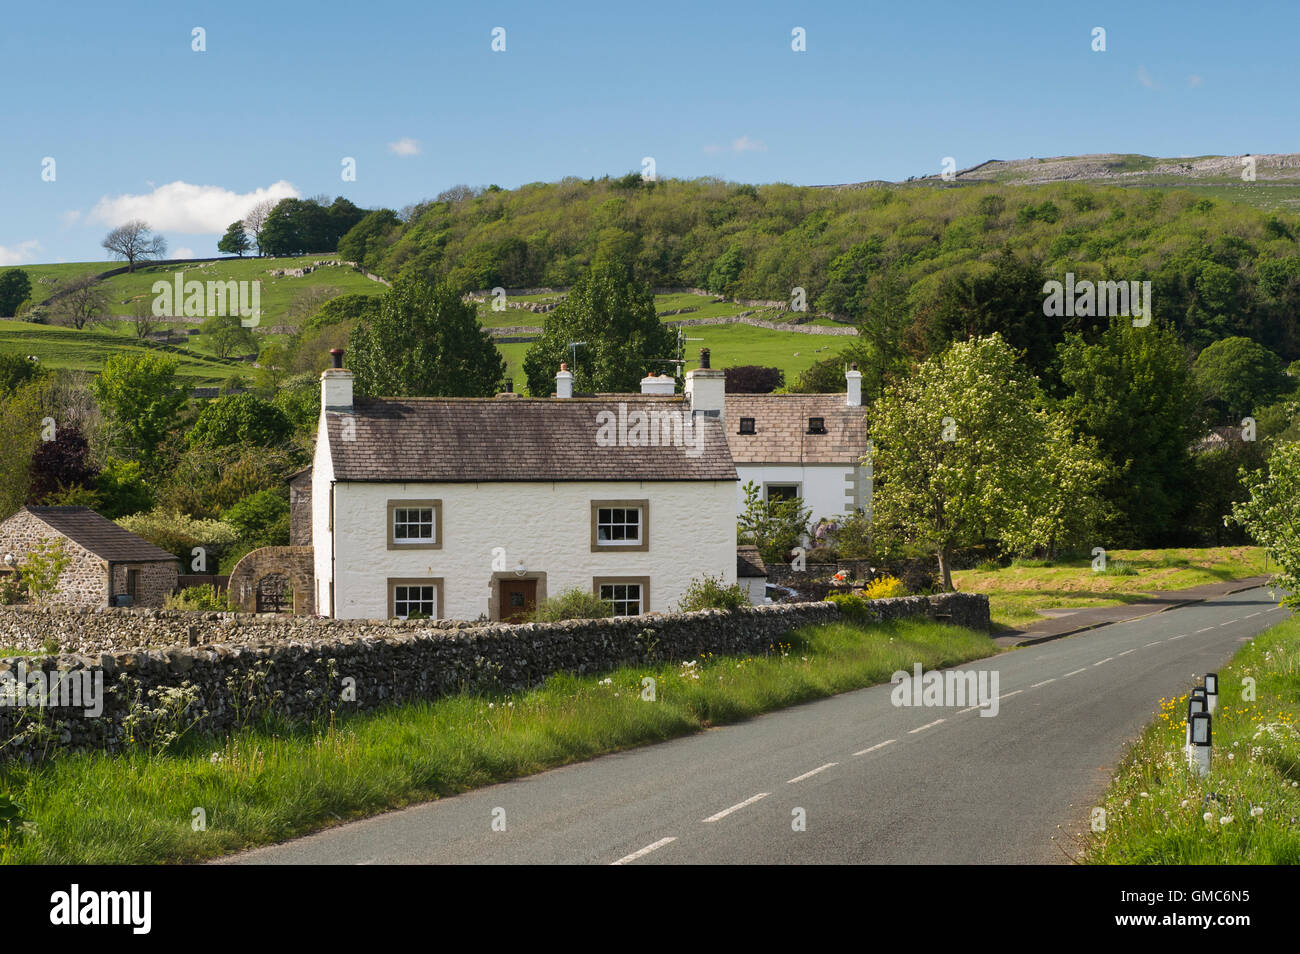 Country lane passes traditional, white, stone-built, Yorkshire Dales cottages -  Austwick village, North Yorkshire, England. Stock Photo